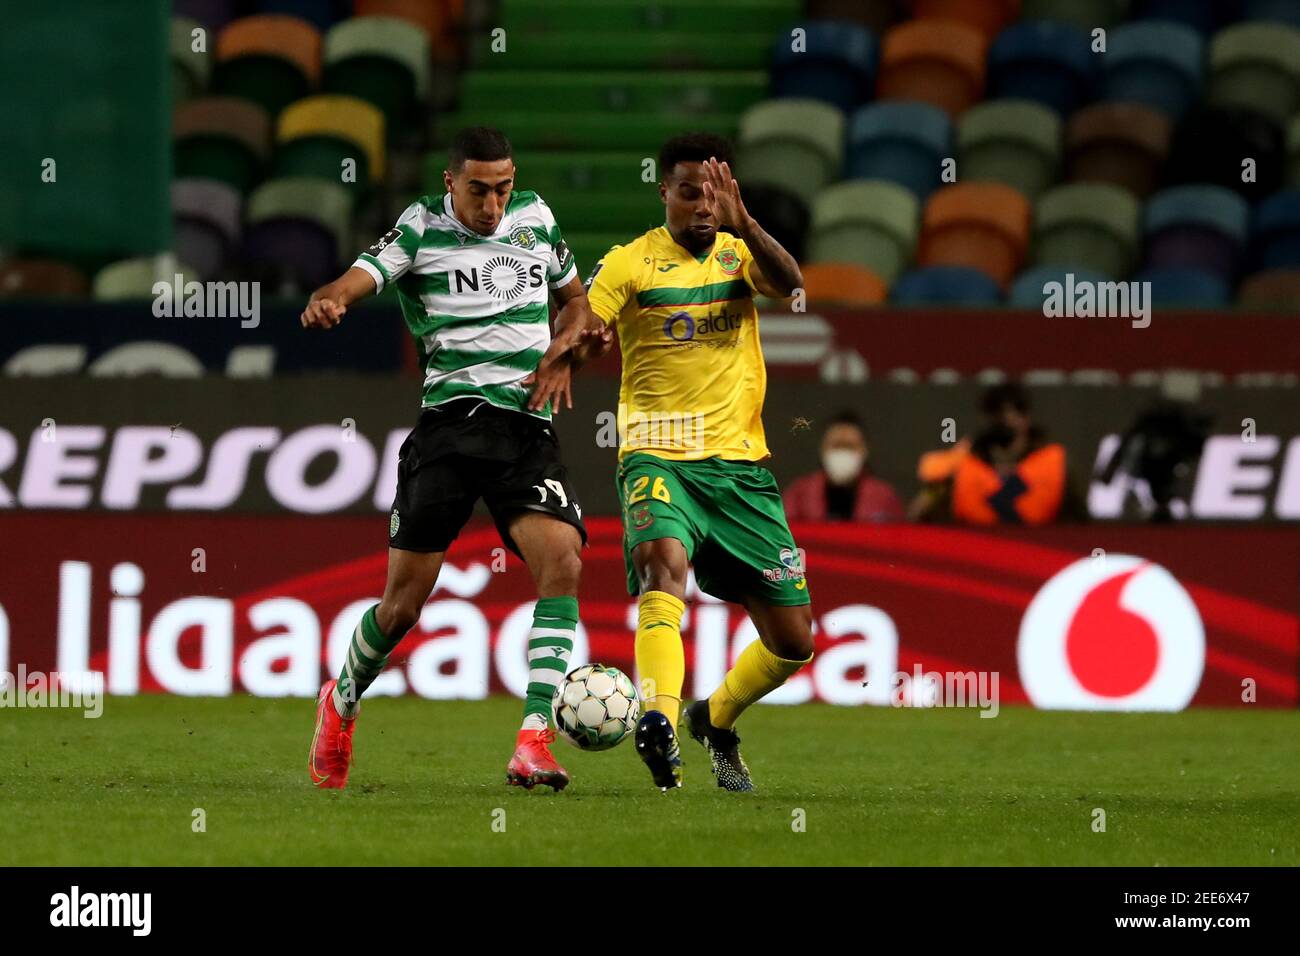 Lisbon, Portugal. 15th Feb, 2021. Tiago Tomas of Sporting CP (L) vies with Maracas of FC Pacos Ferreira during the Portuguese League football match between Sporting CP and FC Pacos de Ferreira at Jose Alvalade stadium in Lisbon, Portugal on February 15, 2021. Credit: Pedro Fiuza/ZUMA Wire/Alamy Live News Stock Photo